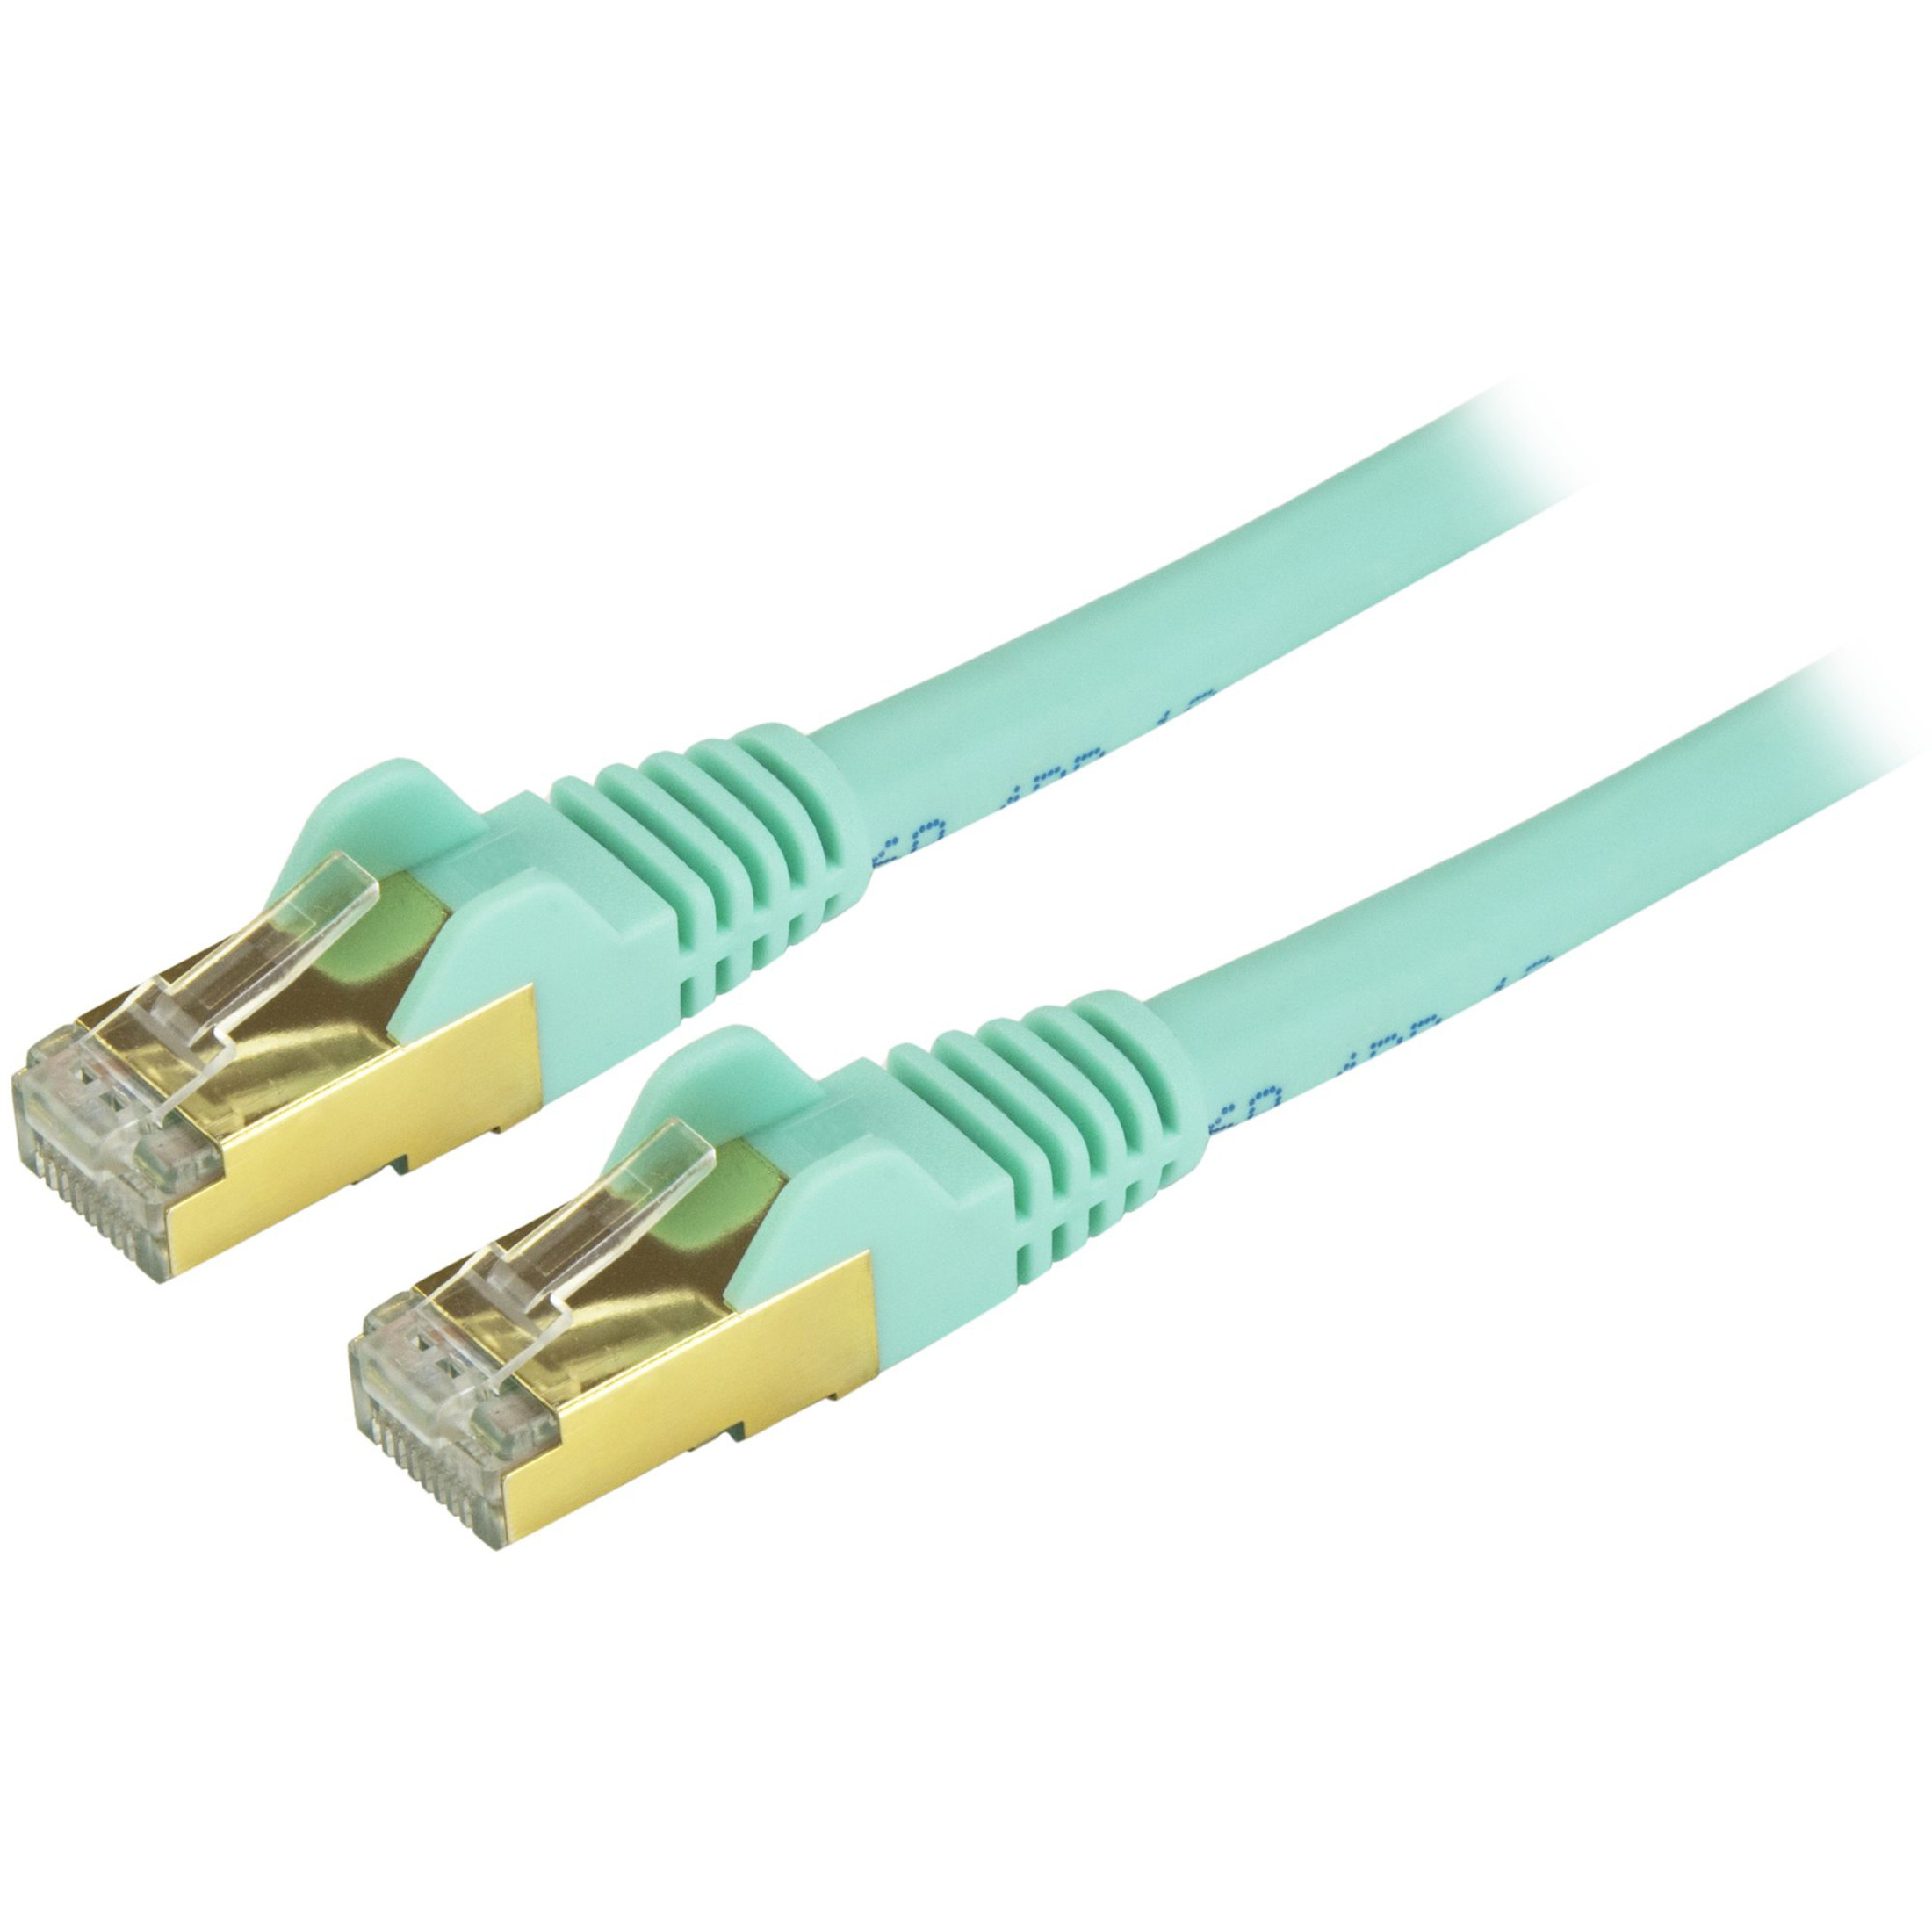 Startech .com 35ft CAT6a Ethernet Cable10 Gigabit Category 6a Shielded Snagless 100W PoE Patch Cord10GbE Aqua UL Certified Wiring/TIA -… C6ASPAT35AQ